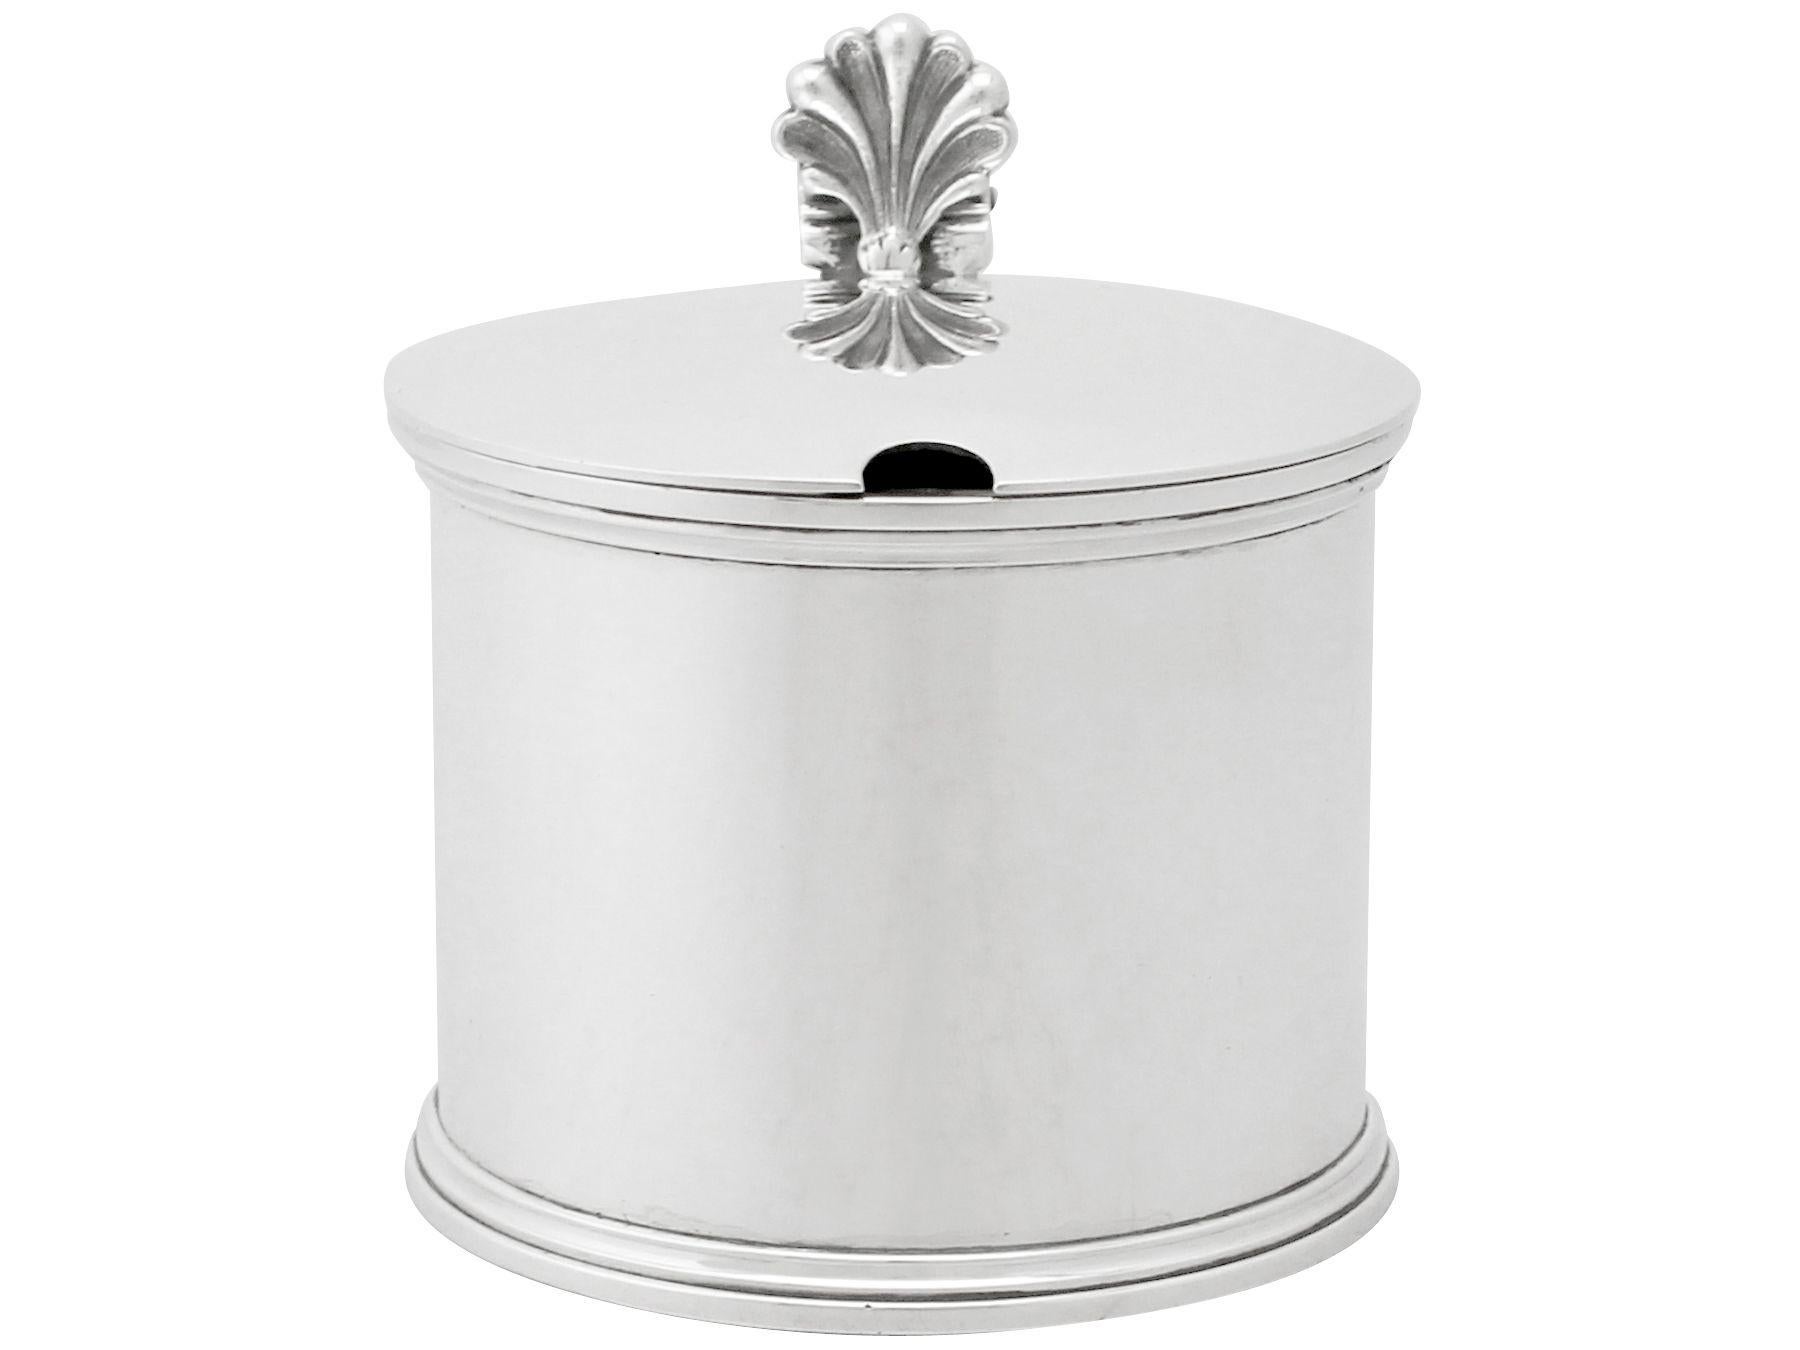 An exceptional, fine and impressive, large antique George V English sterling silver drum mustard pot; an addition to our silver cruets/condiments collection.

This exceptional antique George V sterling silver mustard pot has a plain drum form onto